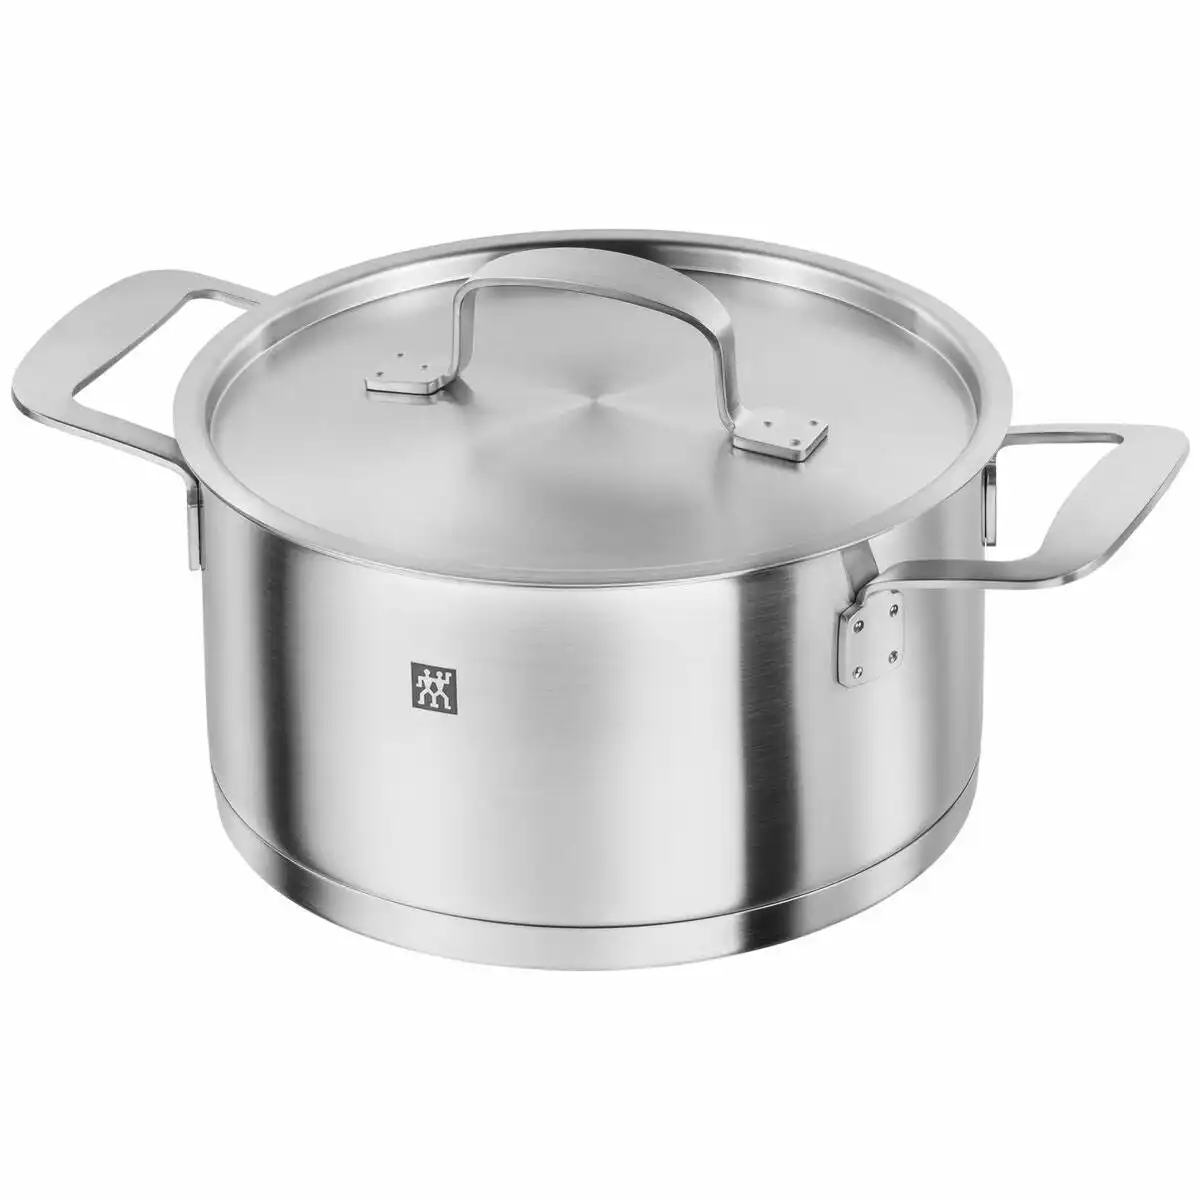 Zwilling 20cm Base Stew pot with Lid